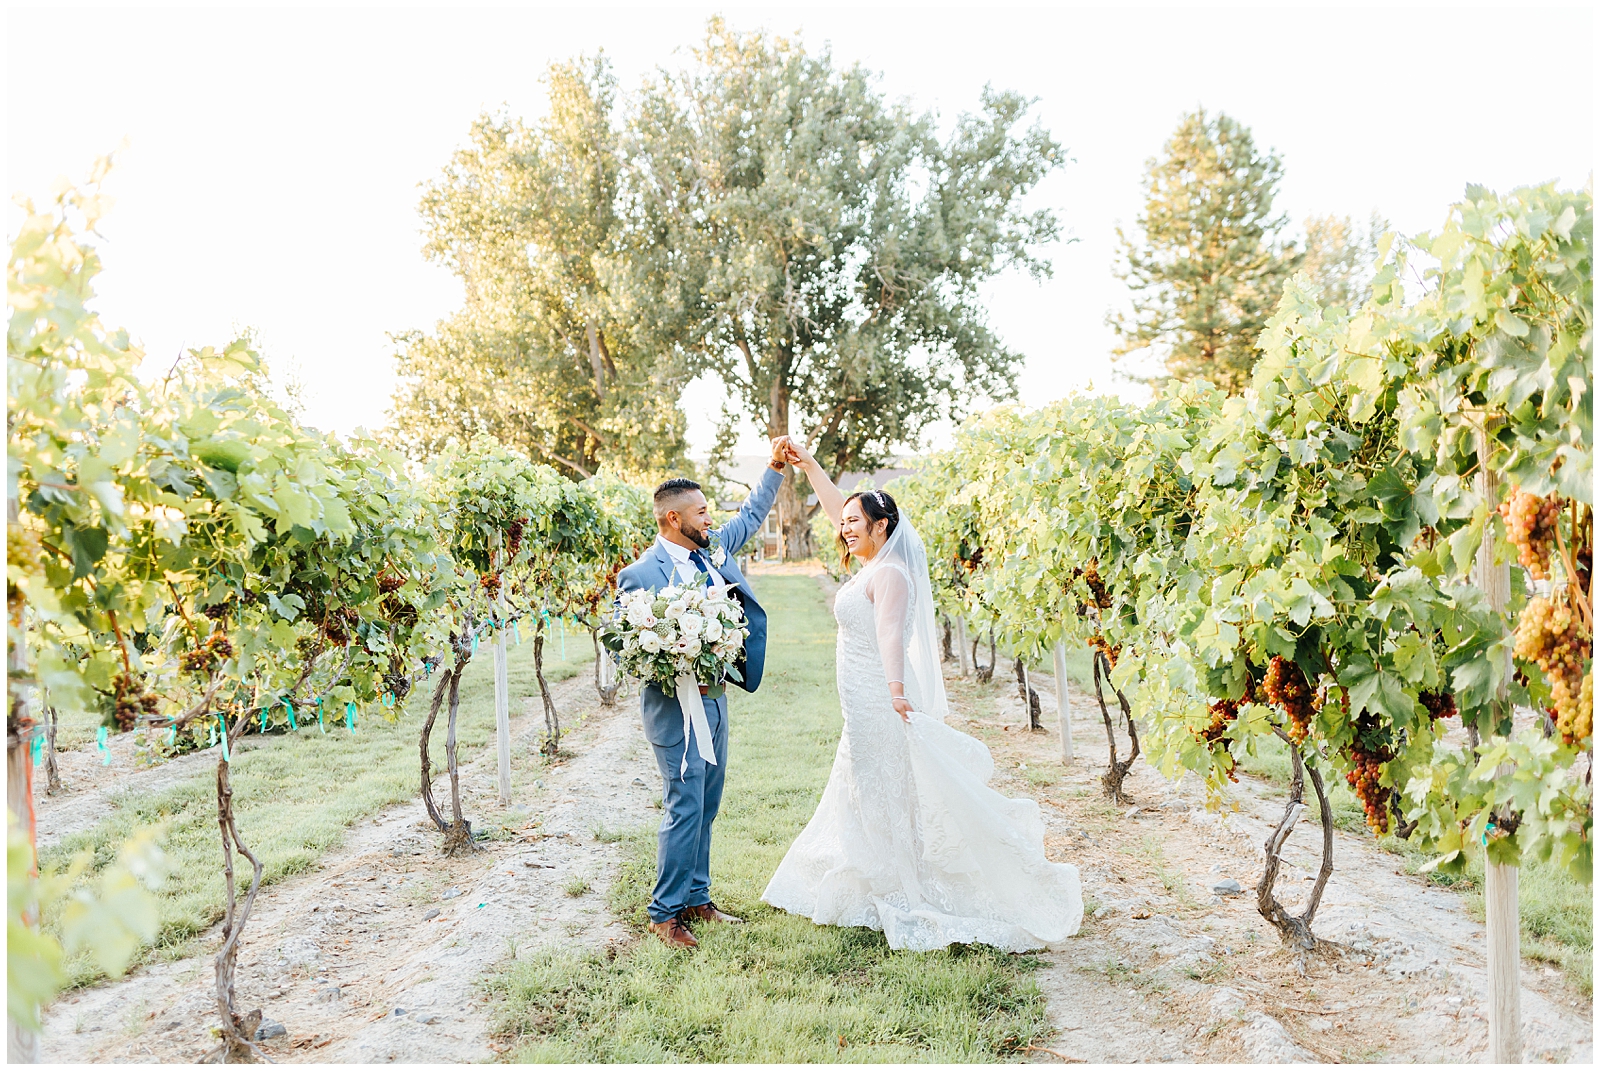 Dusty Blue Fox Canyon Vineyards Wedding Twirling in the Vineyard at Golden Hour